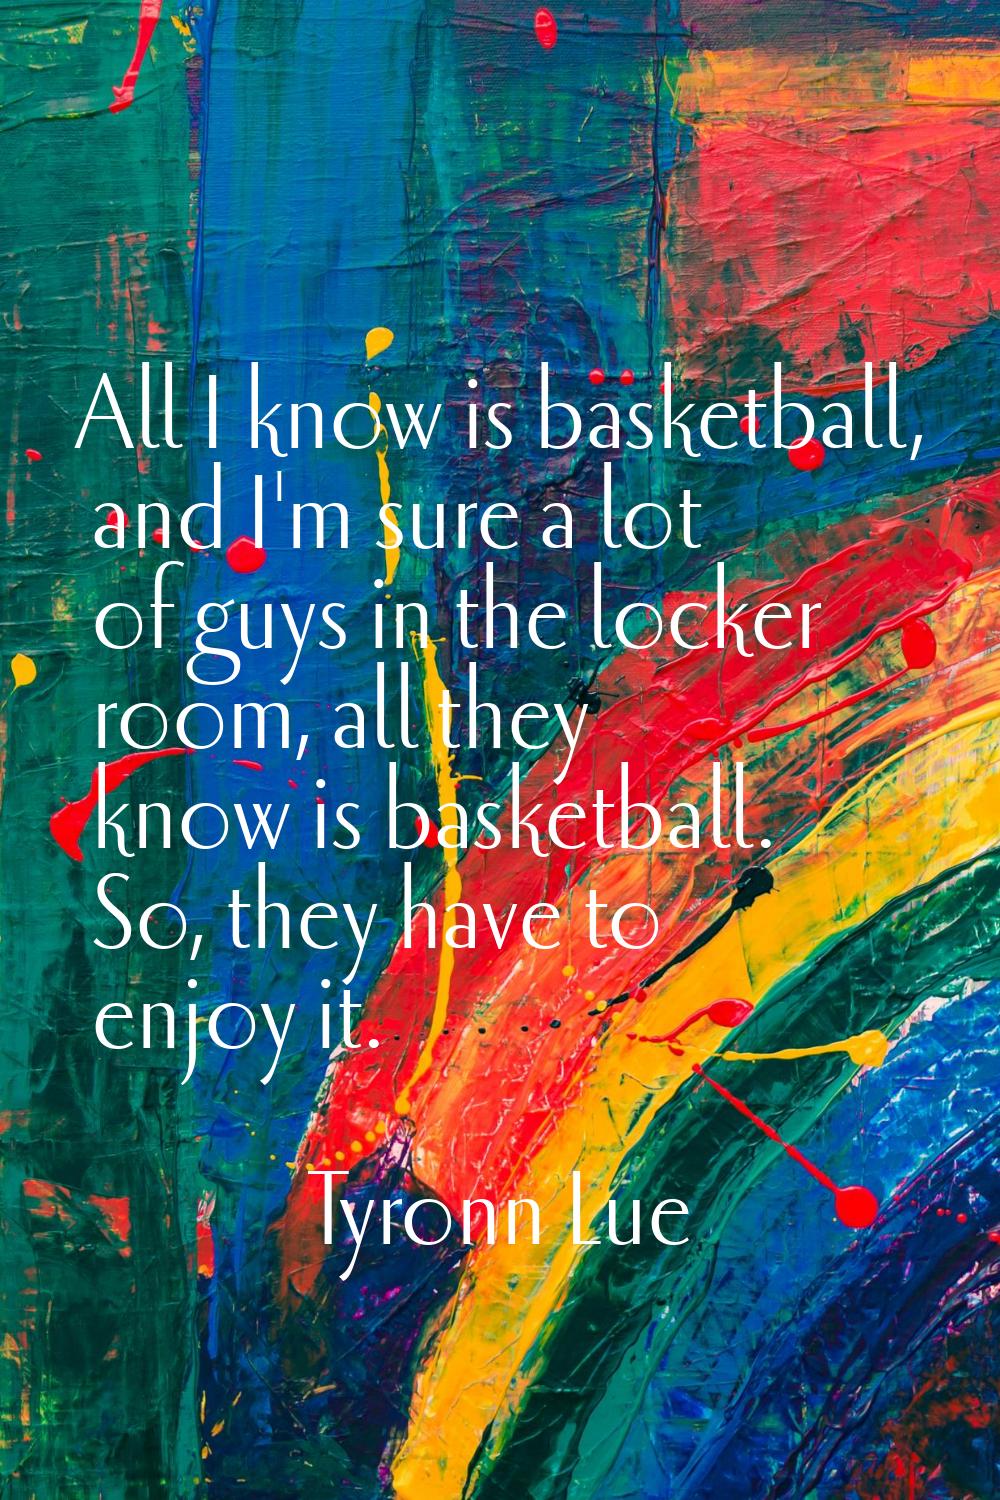 All I know is basketball, and I'm sure a lot of guys in the locker room, all they know is basketbal